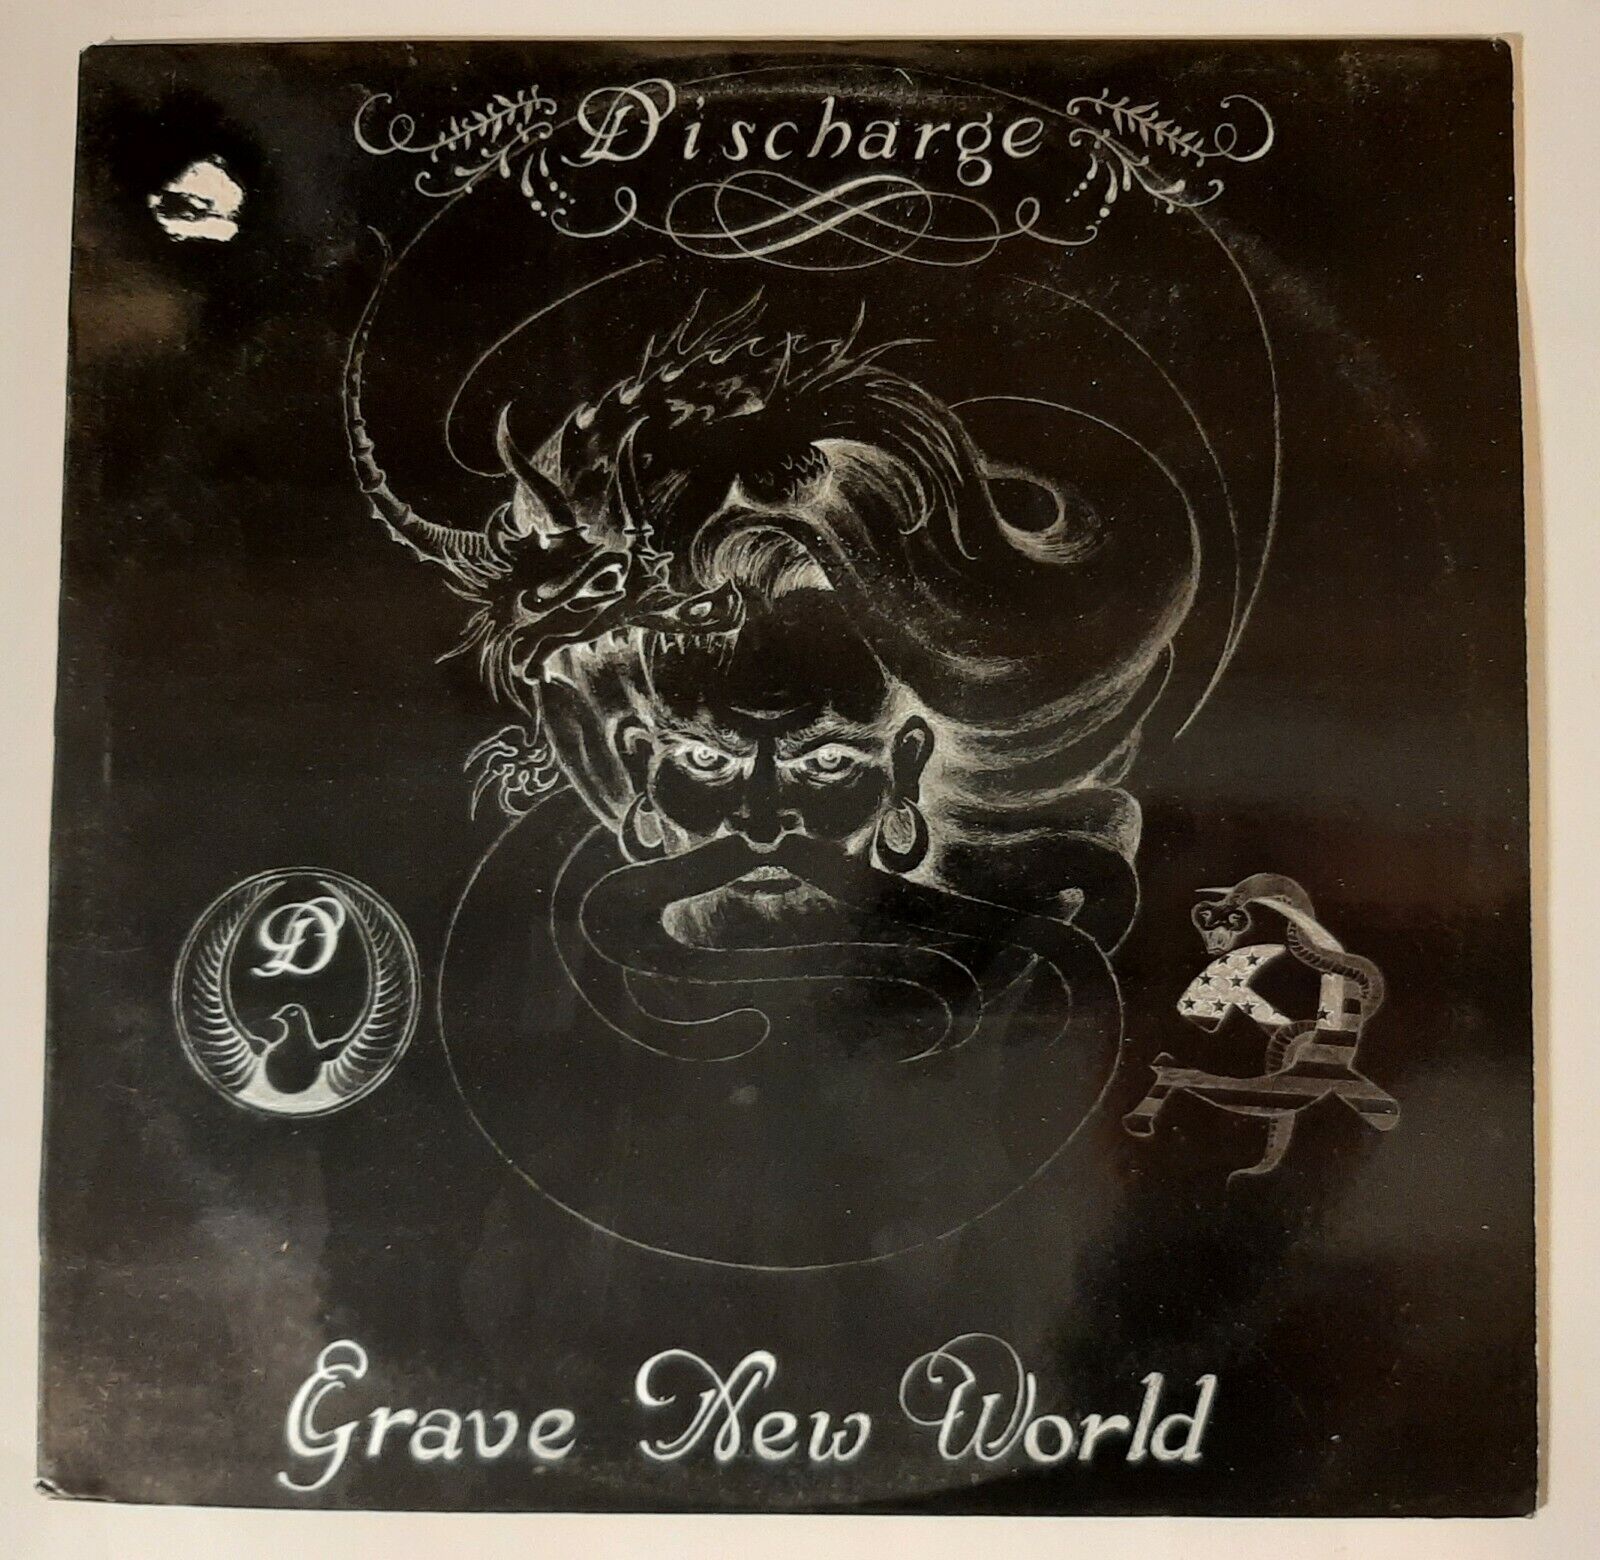 Discharge – Grave New World Label: Profile Records, 1986, PRO-1221